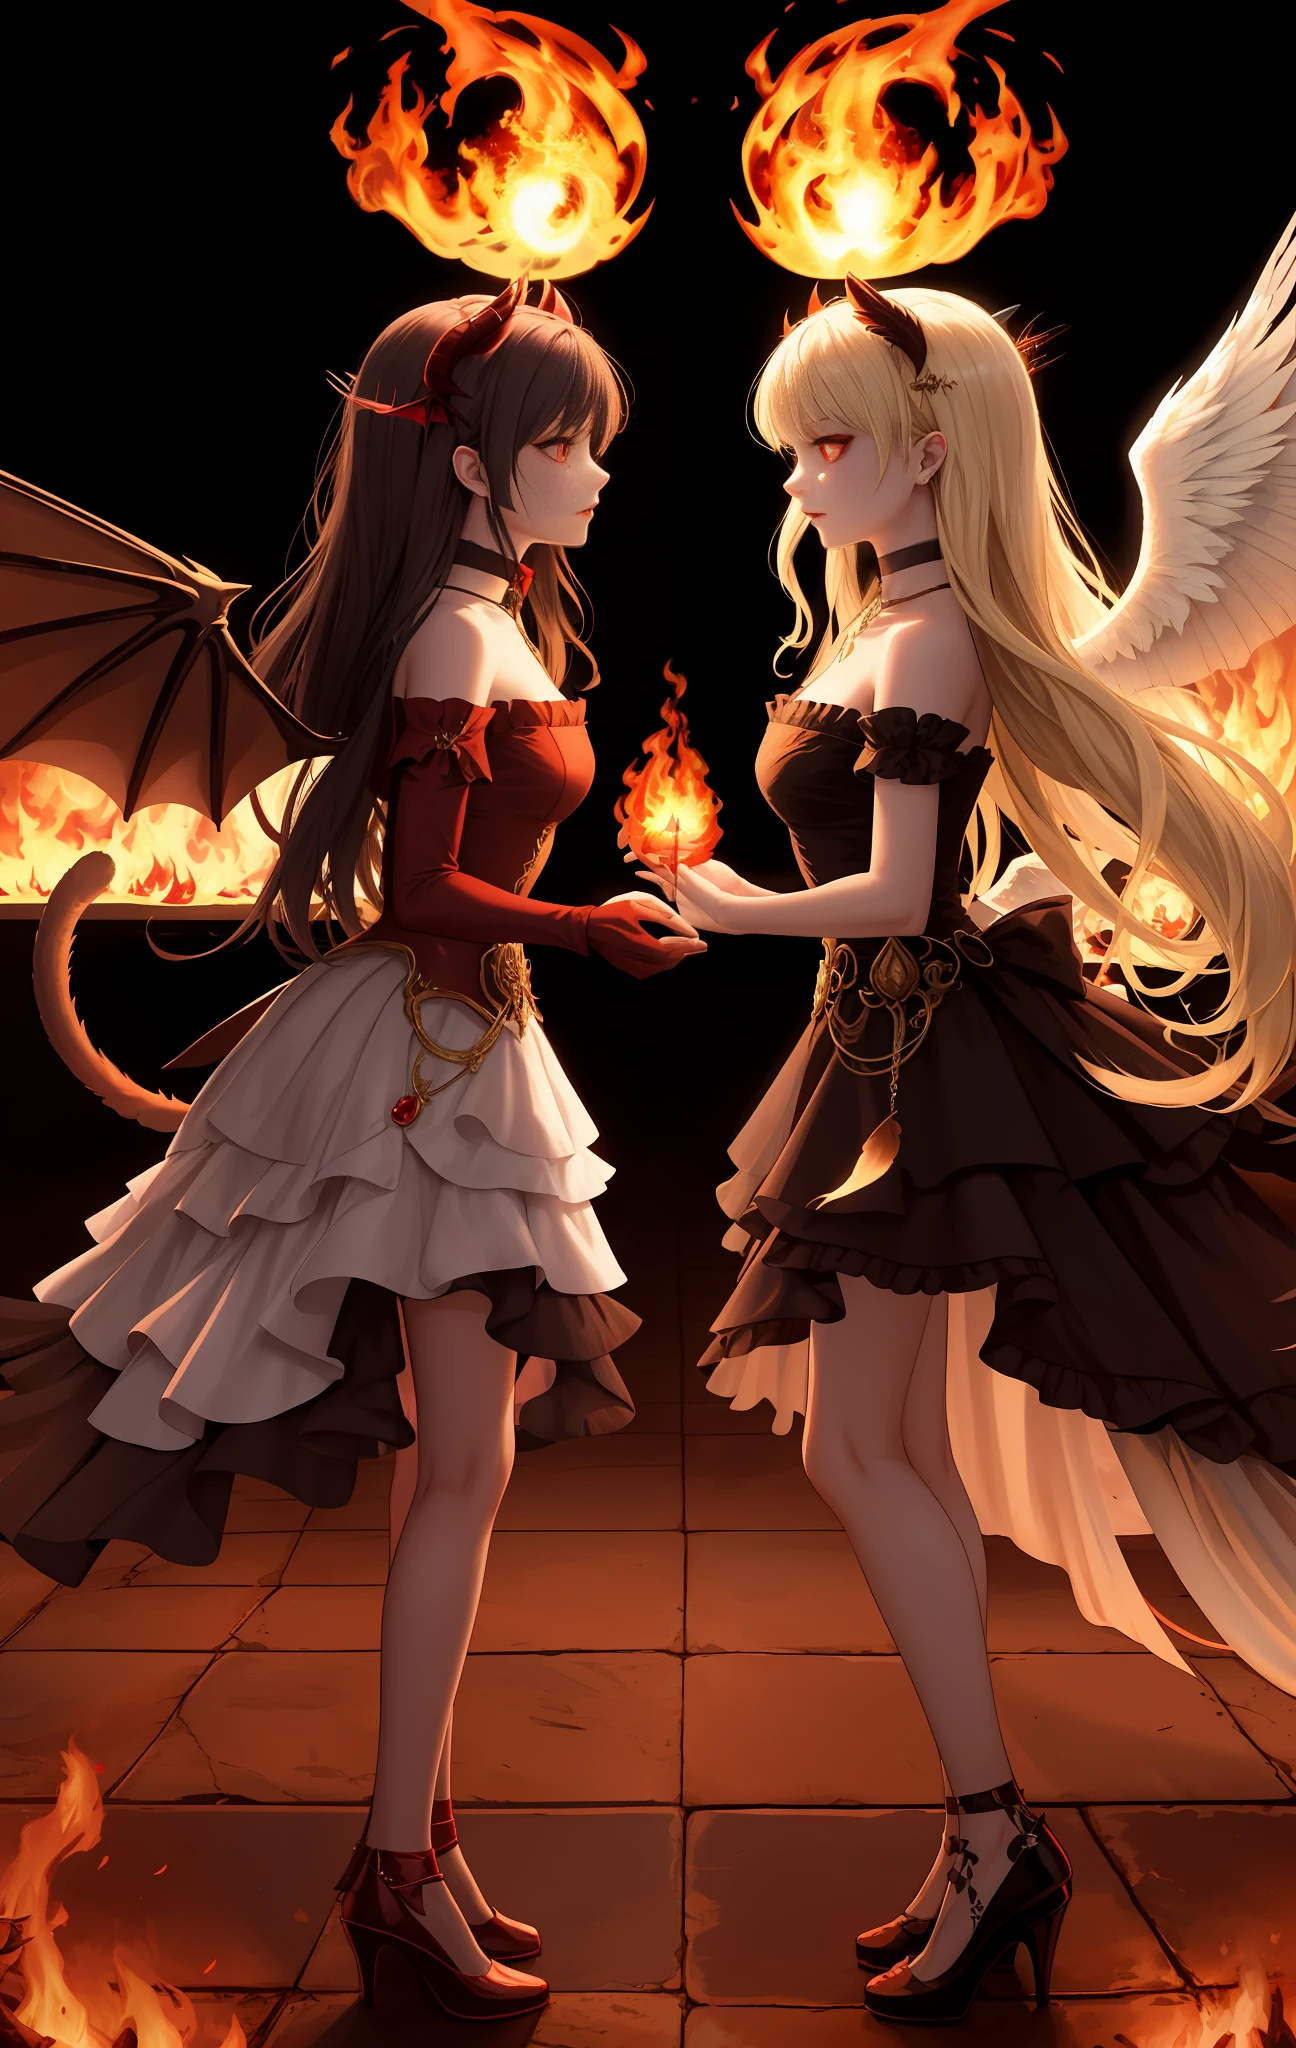 very best quality，​masterpiece，Vampires，Fully covered red and black cloth，Throw flames by hand，Glowing burning eyes，Visible vampire teeth，A high resolution，(fullllbody，twins，2 girls are angels and demons, and they all have a pair of beautiful wings:1.3)，Porcelain dress，hair adornments，a choker，jewelries，beauitful face，s whole body，Tindal effect，realisticlying, Dark Studio, edge lit, dual-tone illumination,(highdetailskin:1.2), 8K  UHD, Digital SLR, softlighting, hightquality, Volumetriclighting, Candid camera, The photograph, A high resolution, 4K, 8K, Background bokeh, feline face，Fire magic，casting spells，Fire dragons fly，Fireball on the palm